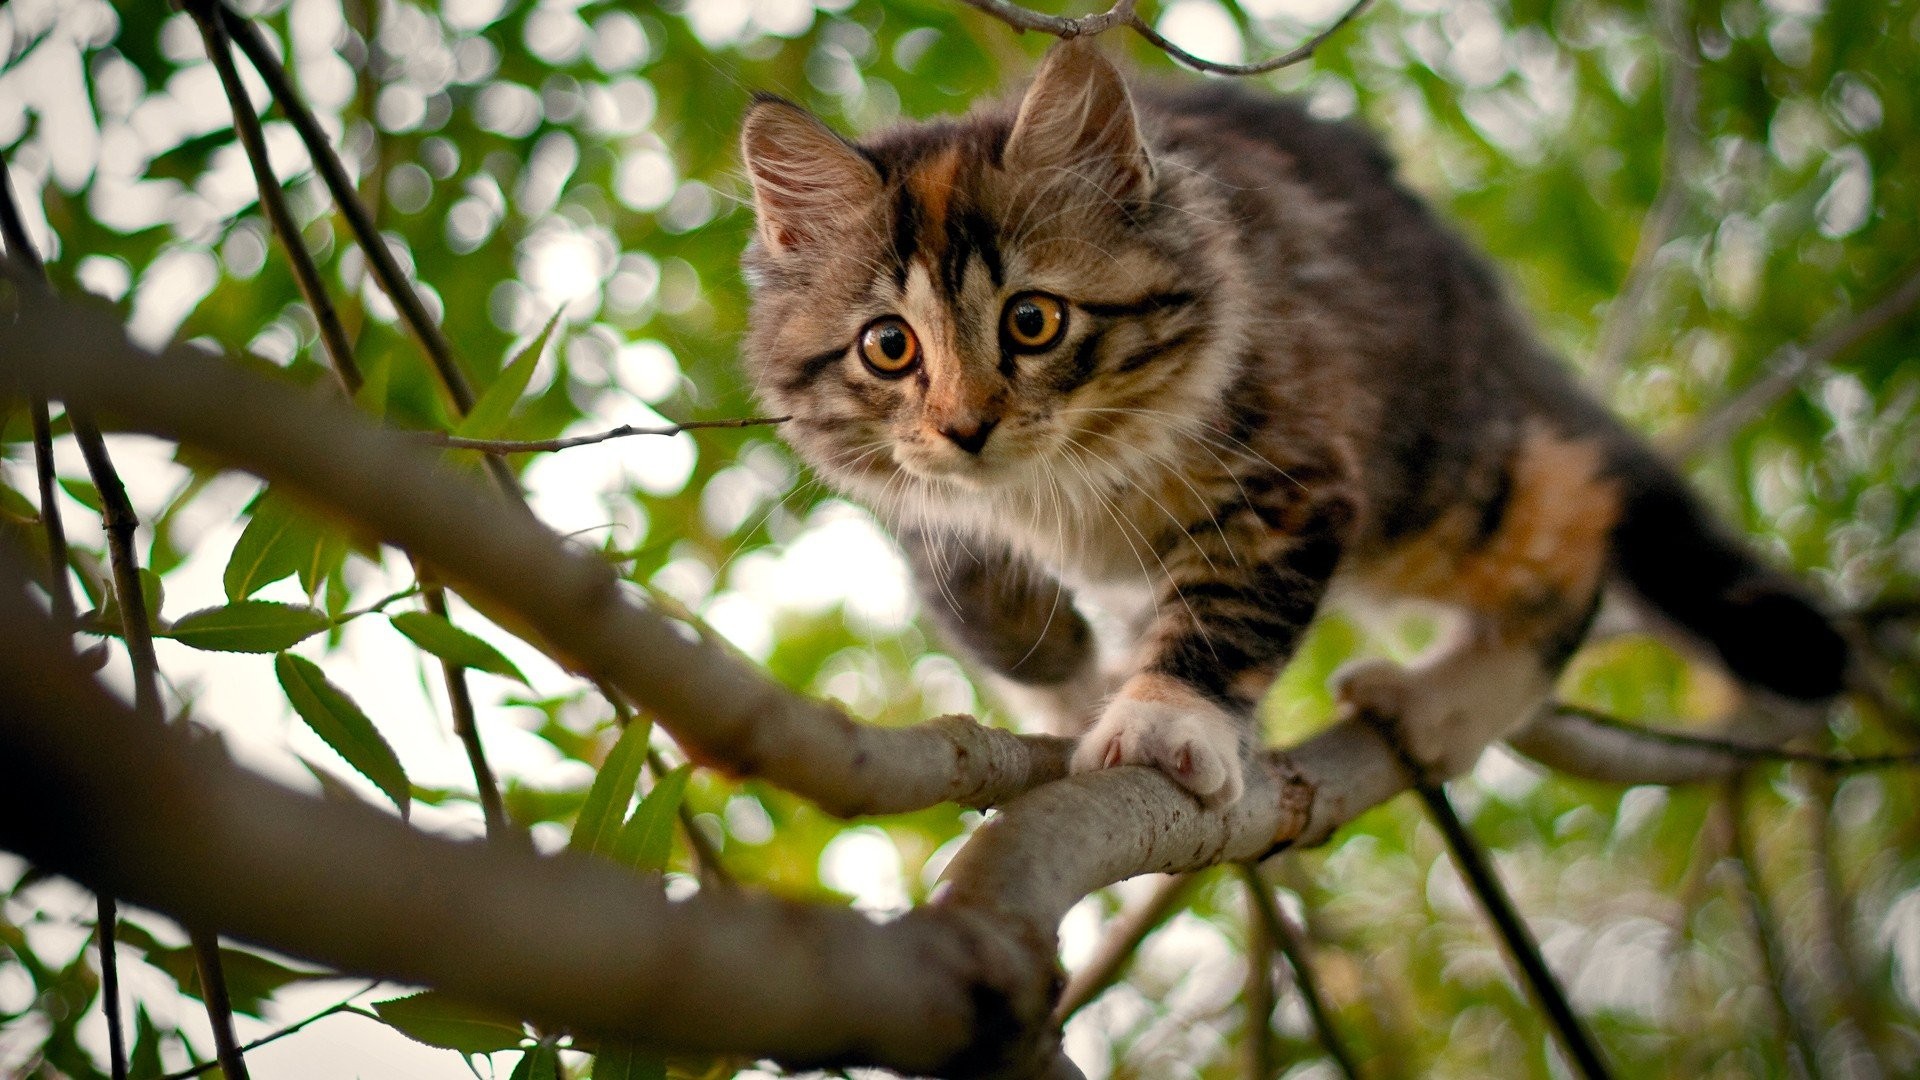 General 1920x1080 nature cats animals mammals outdoors animal eyes branch plants